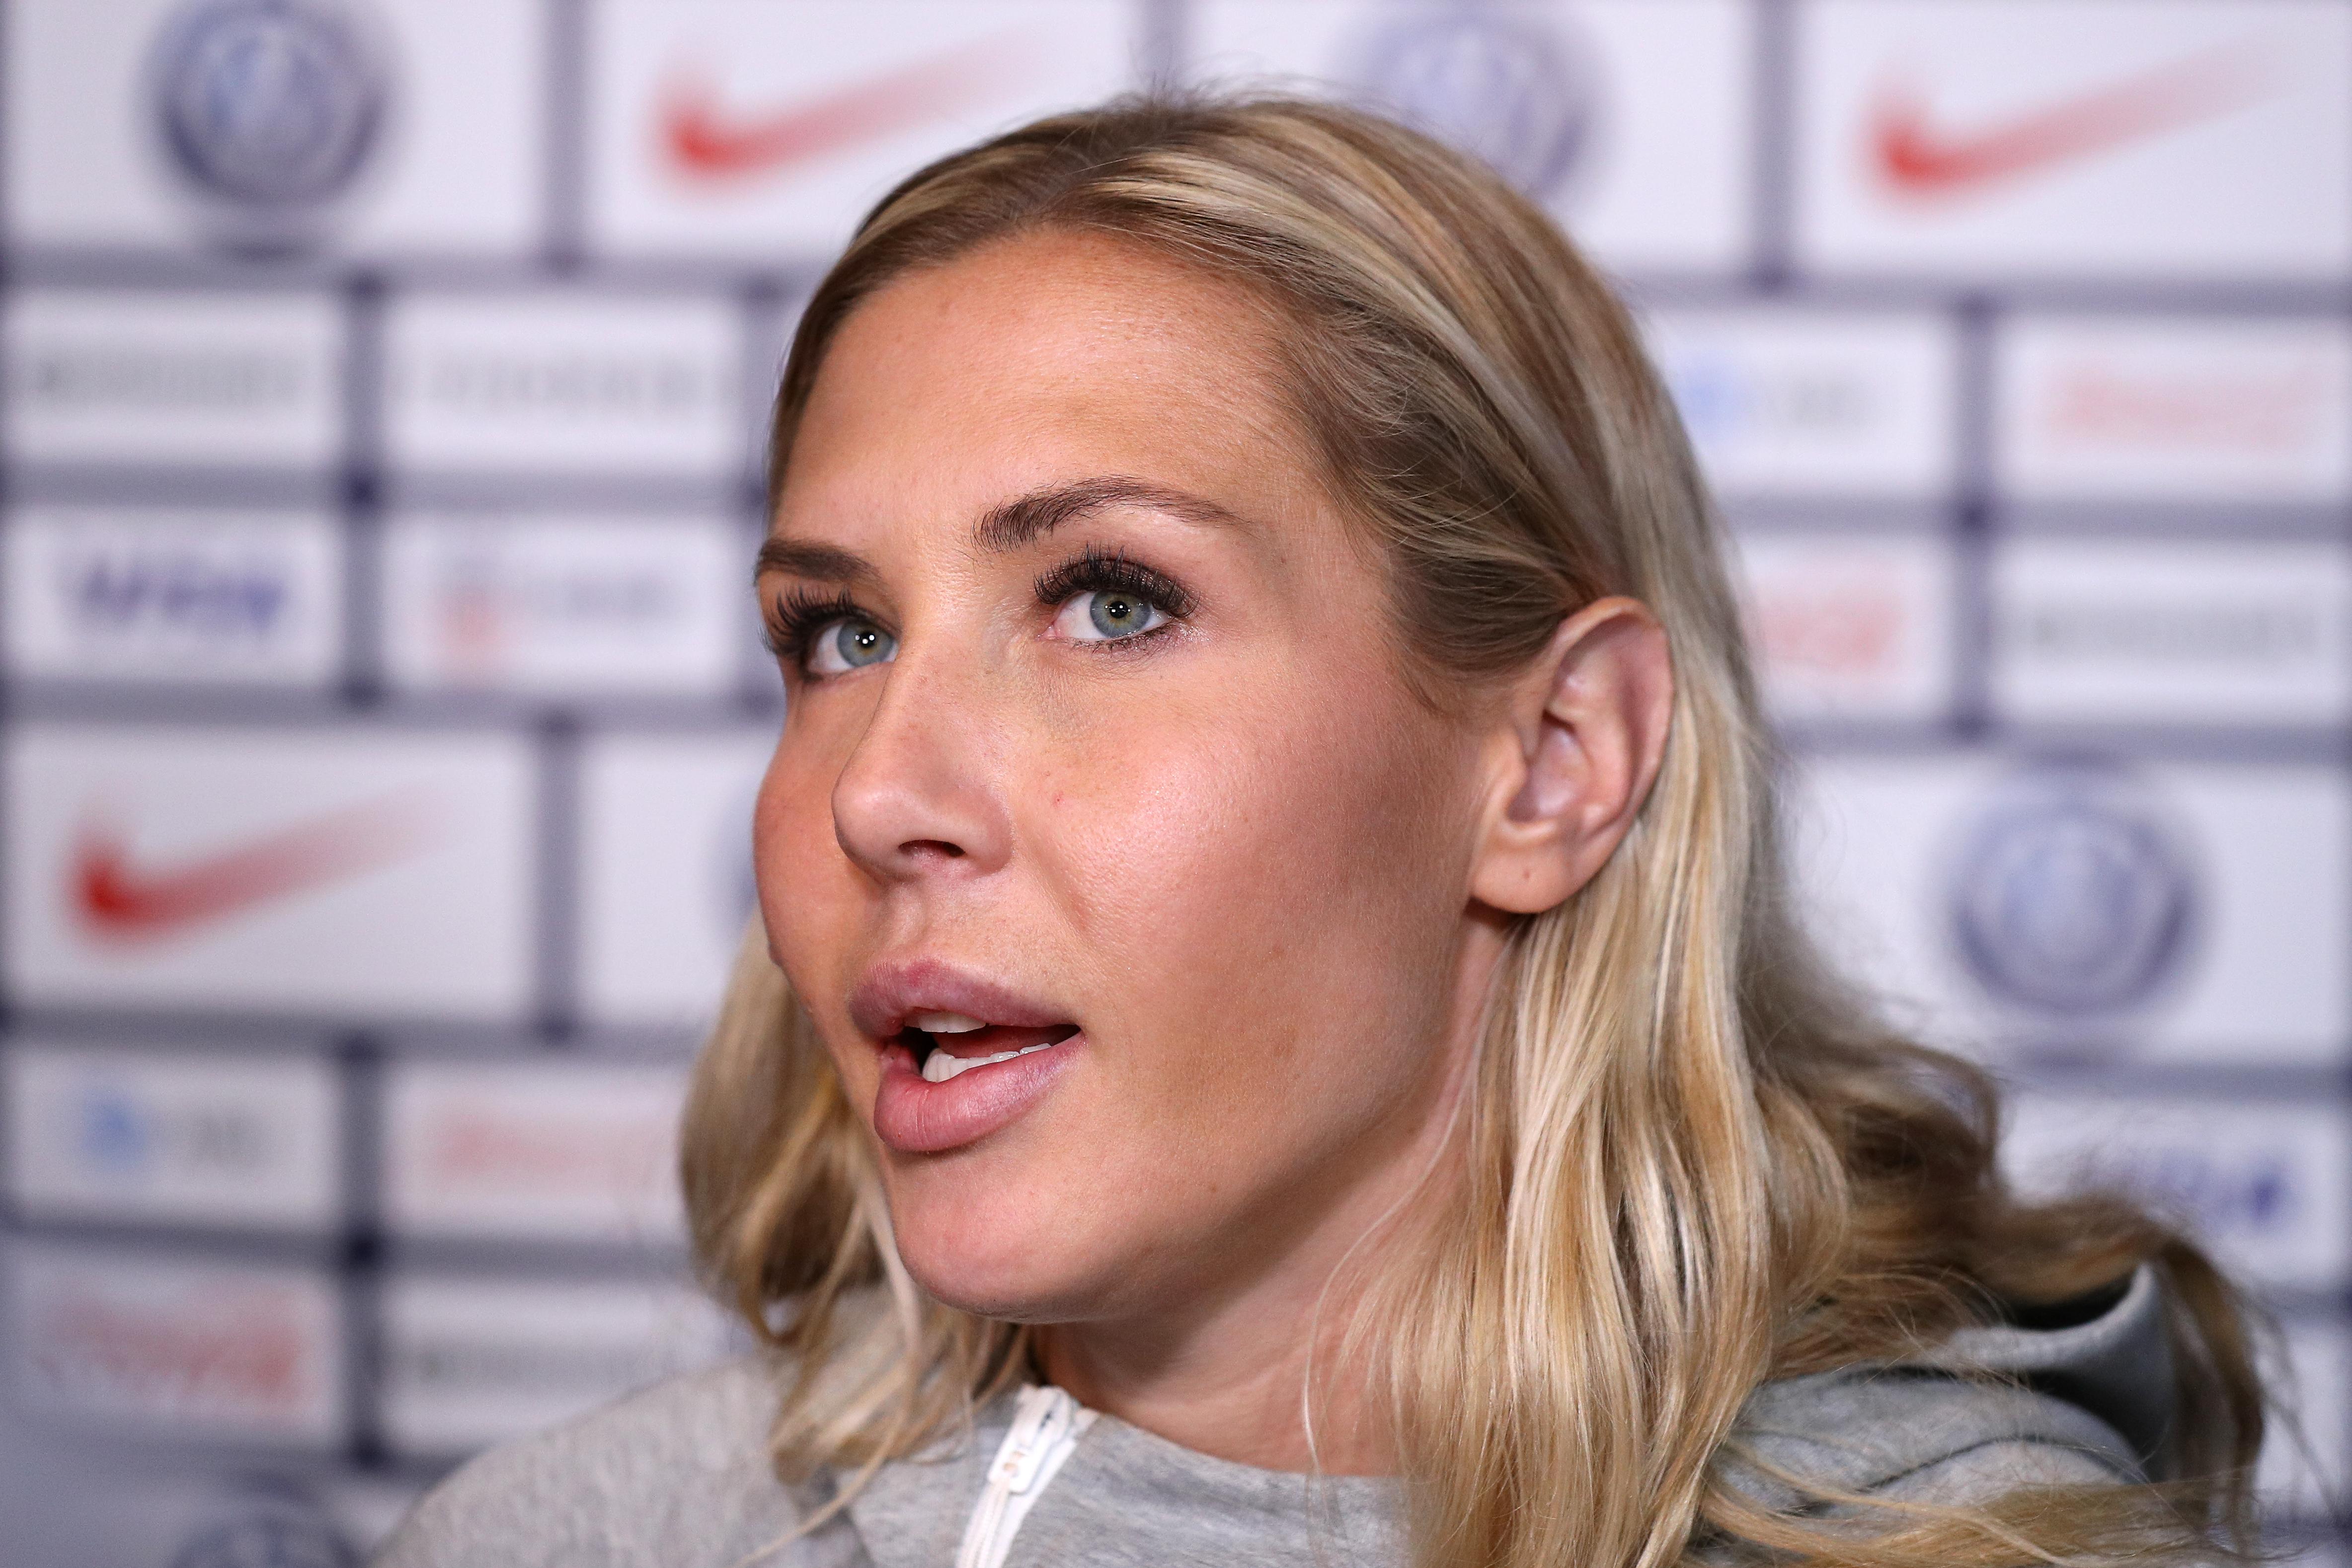 World Cup Champion Allie Long's Hotel Room Burglarized While She